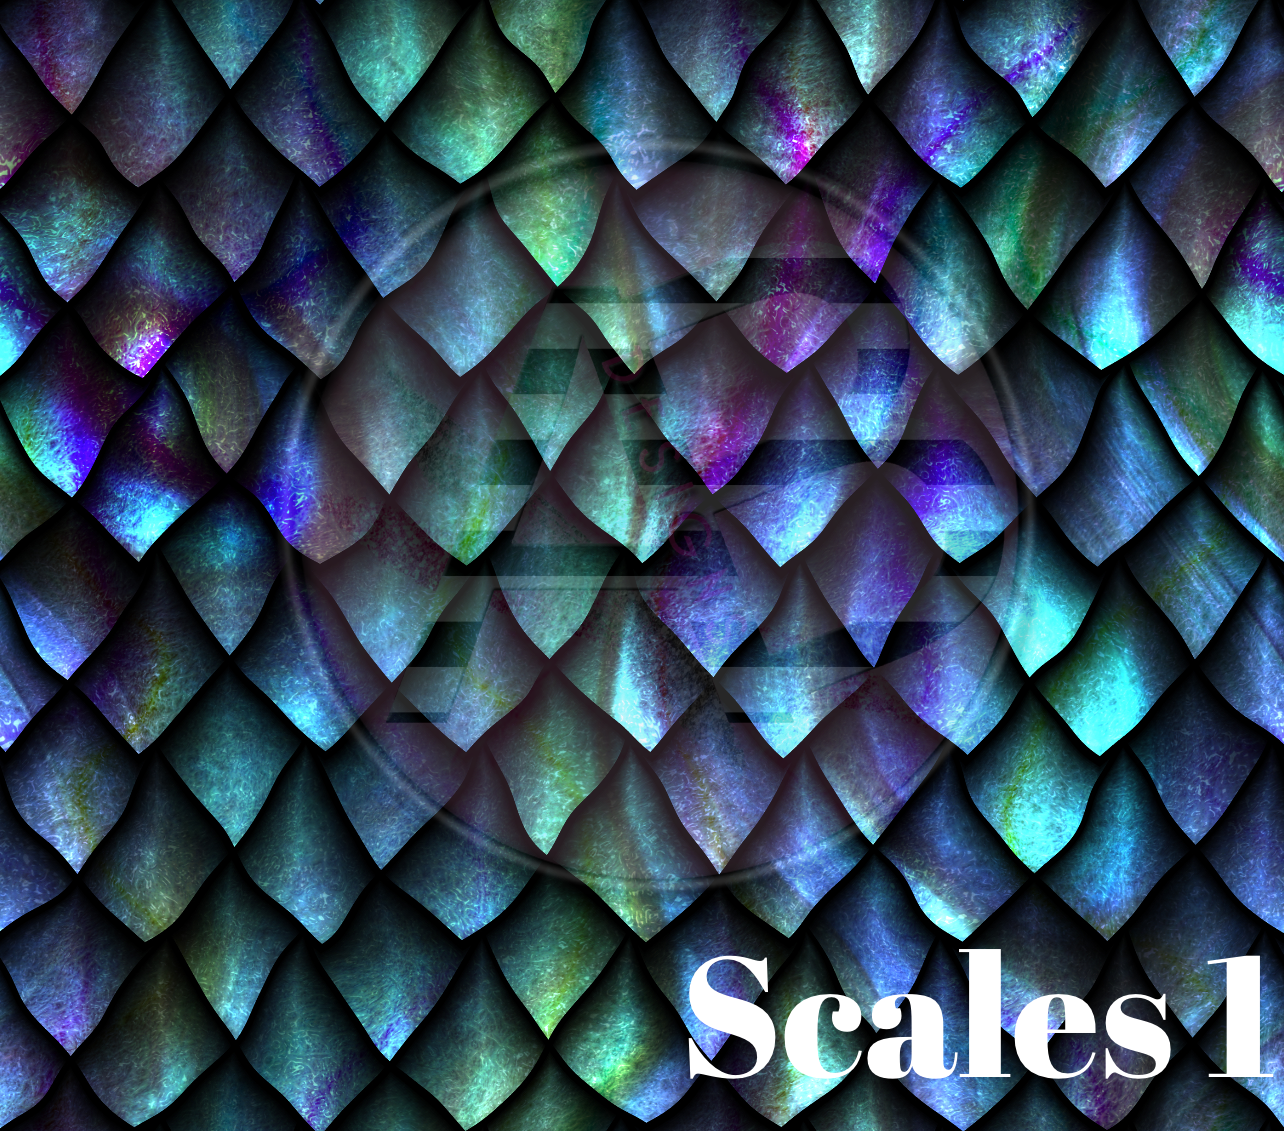 Adhesive Patterned Vinyl - Scales 1